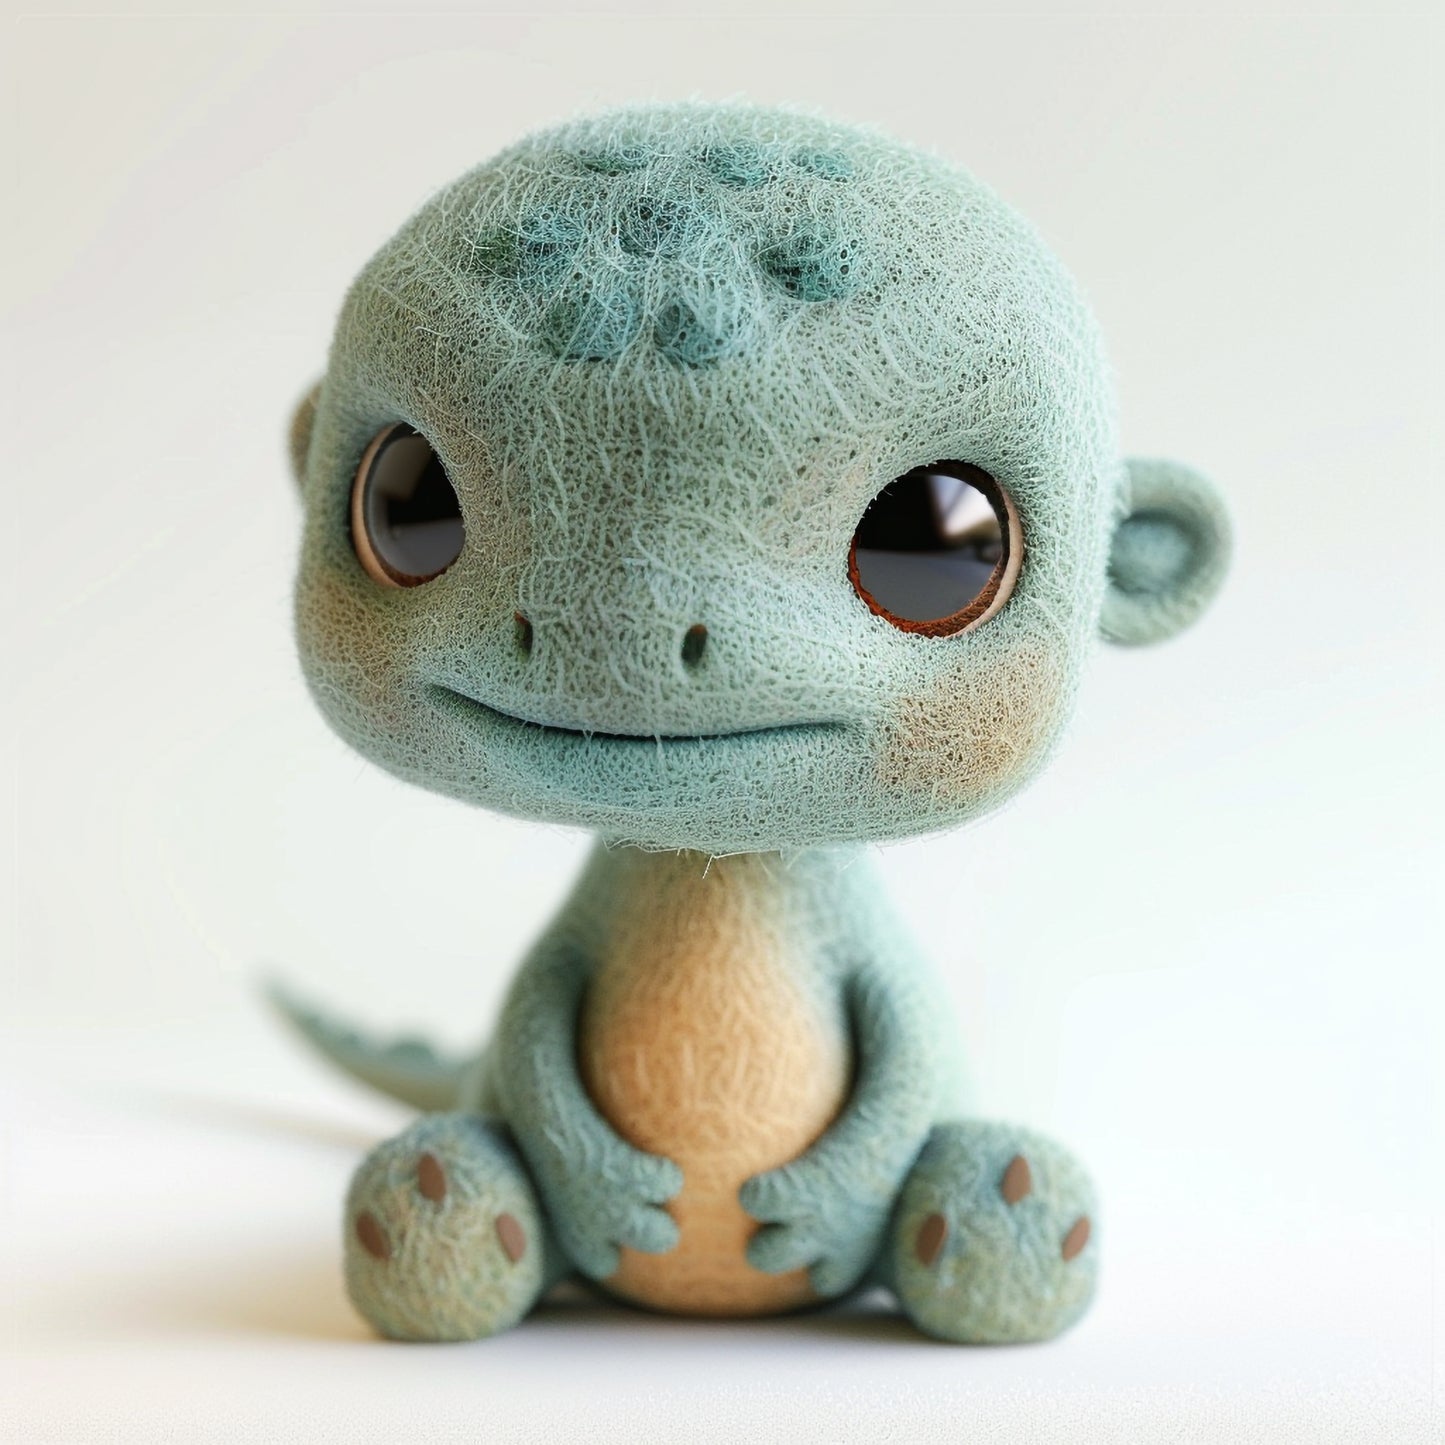 Adorable Needle Felted Baby Dinosaur in Clean Isometric Art